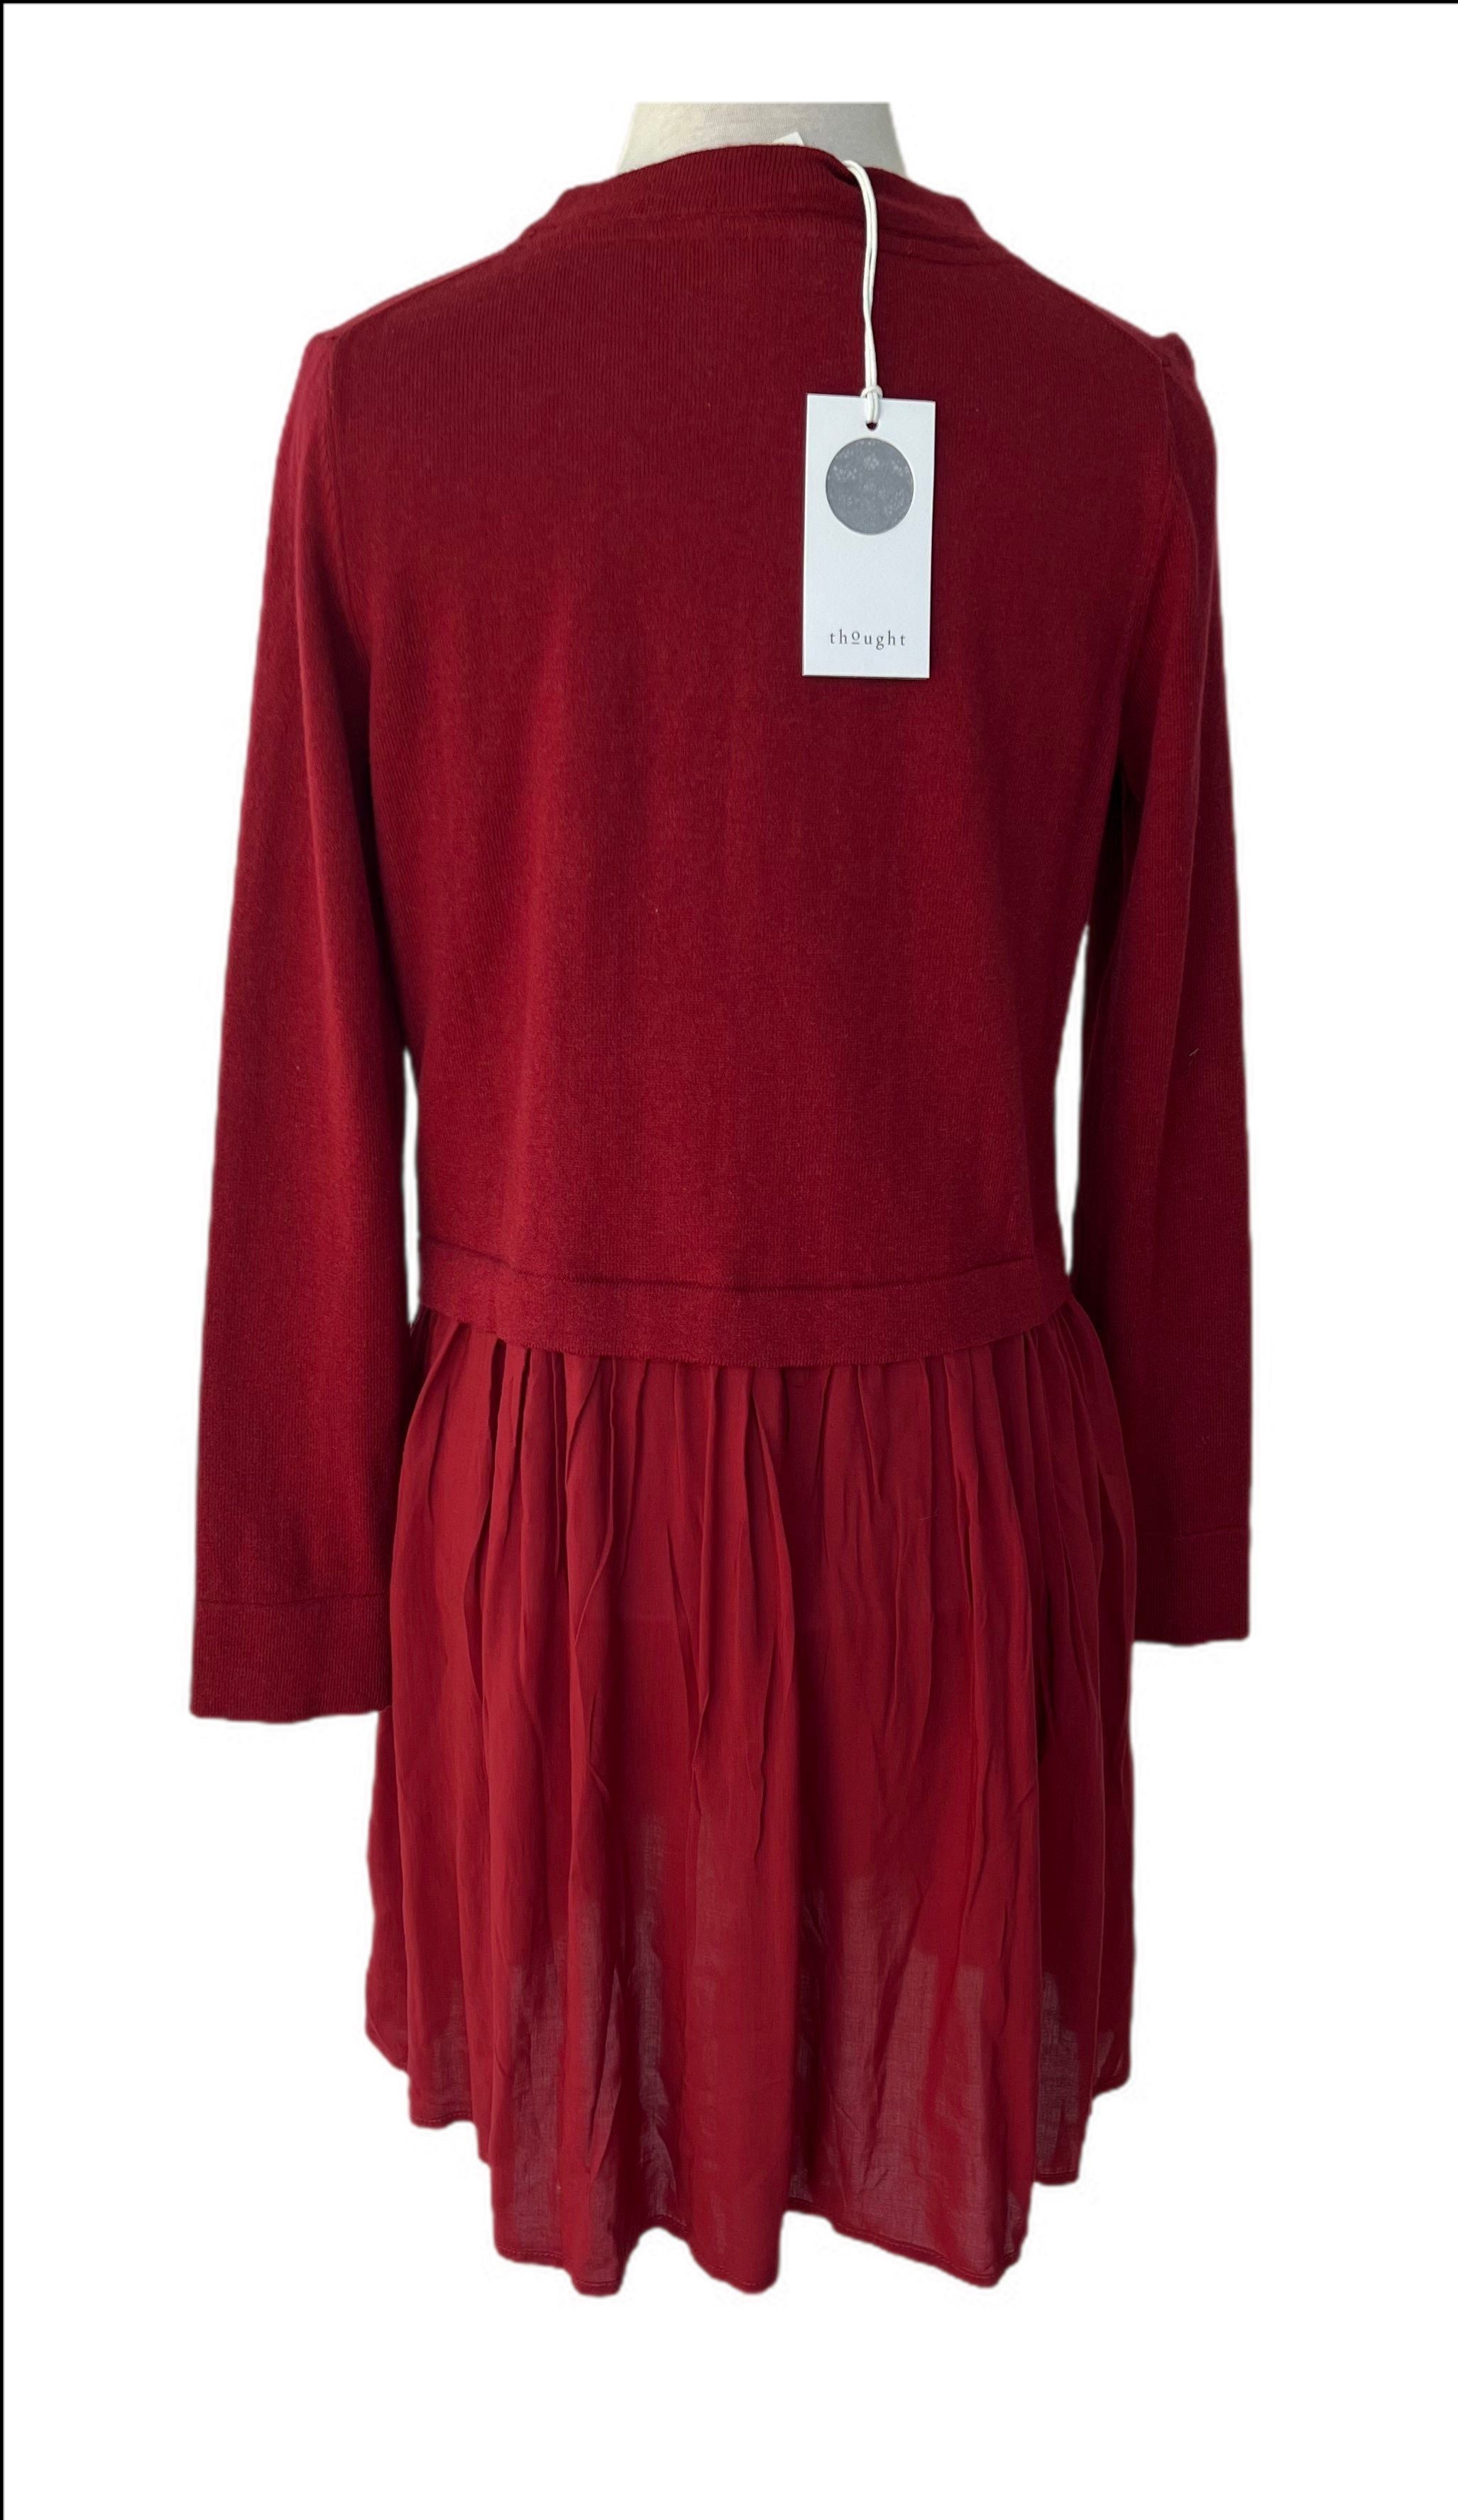 Dress with knit top and Viscose skirt